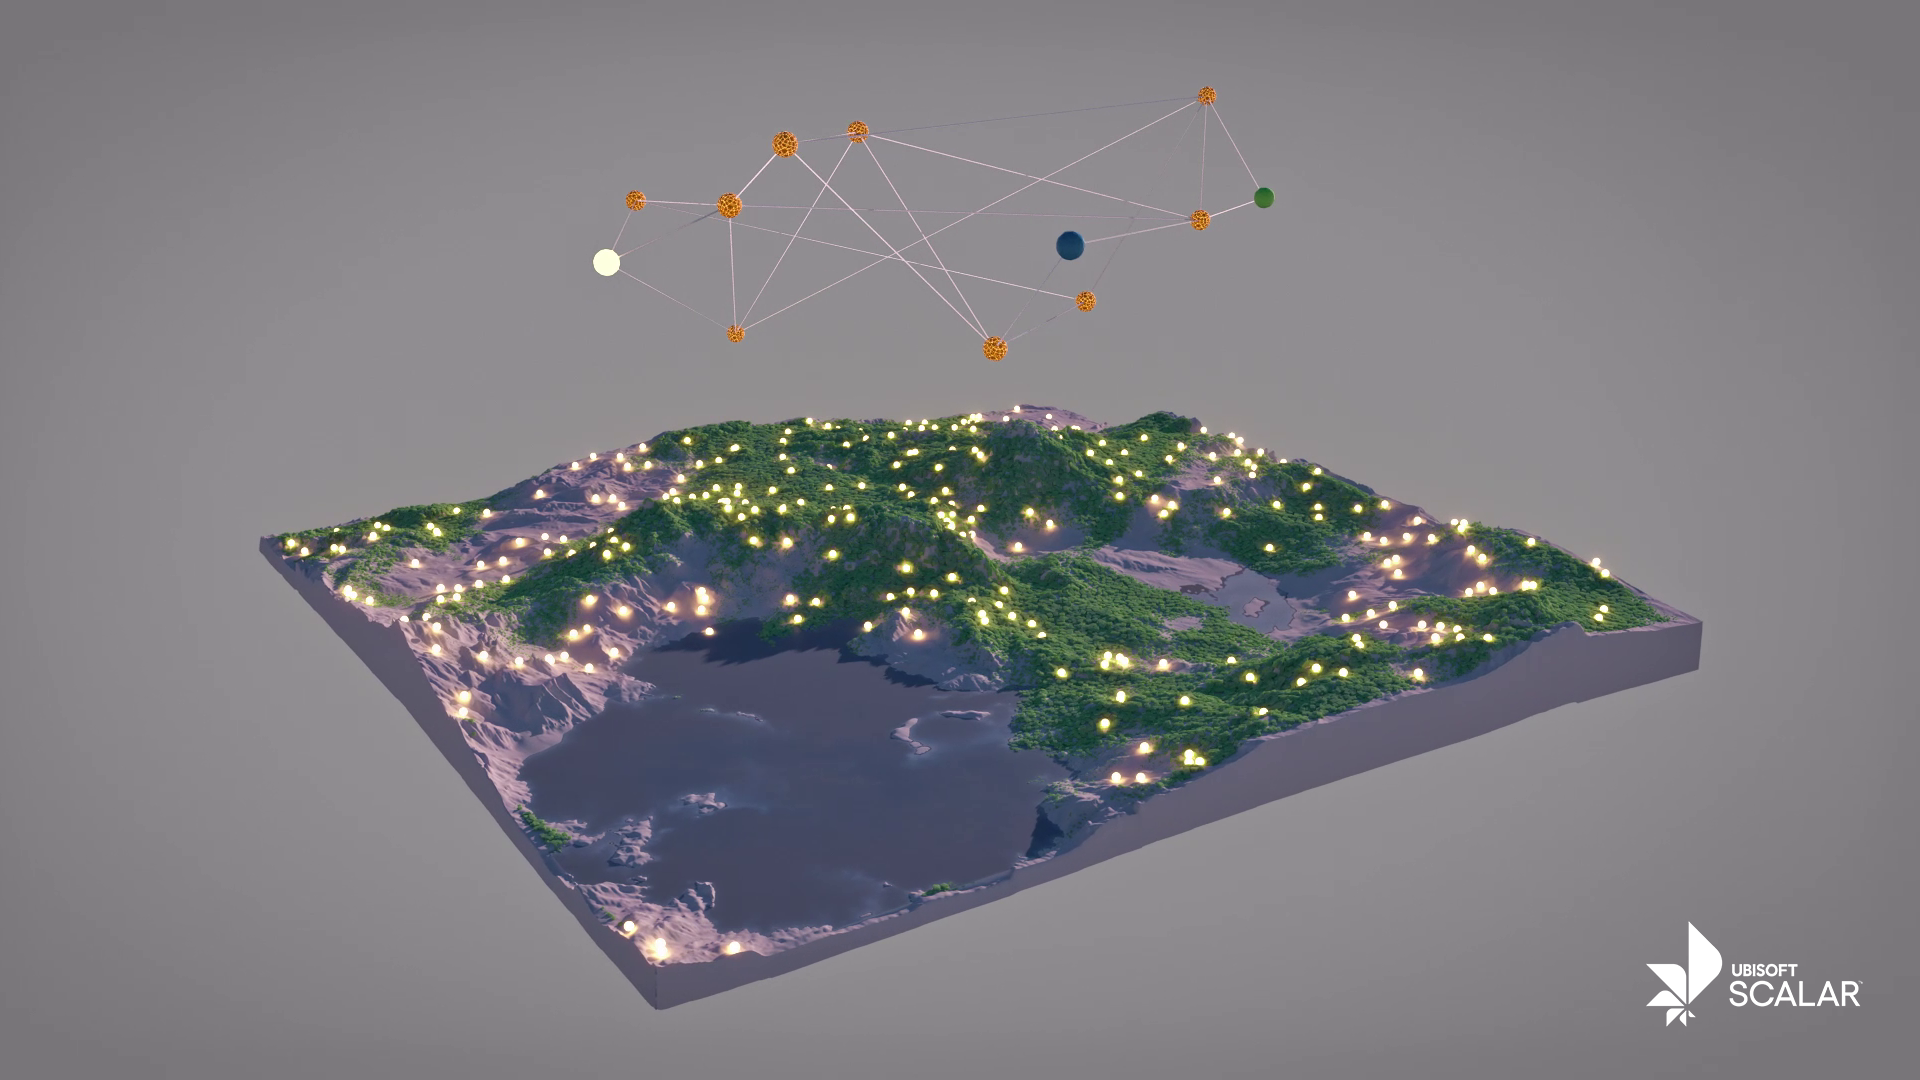 Image for Ubisoft Scalar aims to make games more like the web